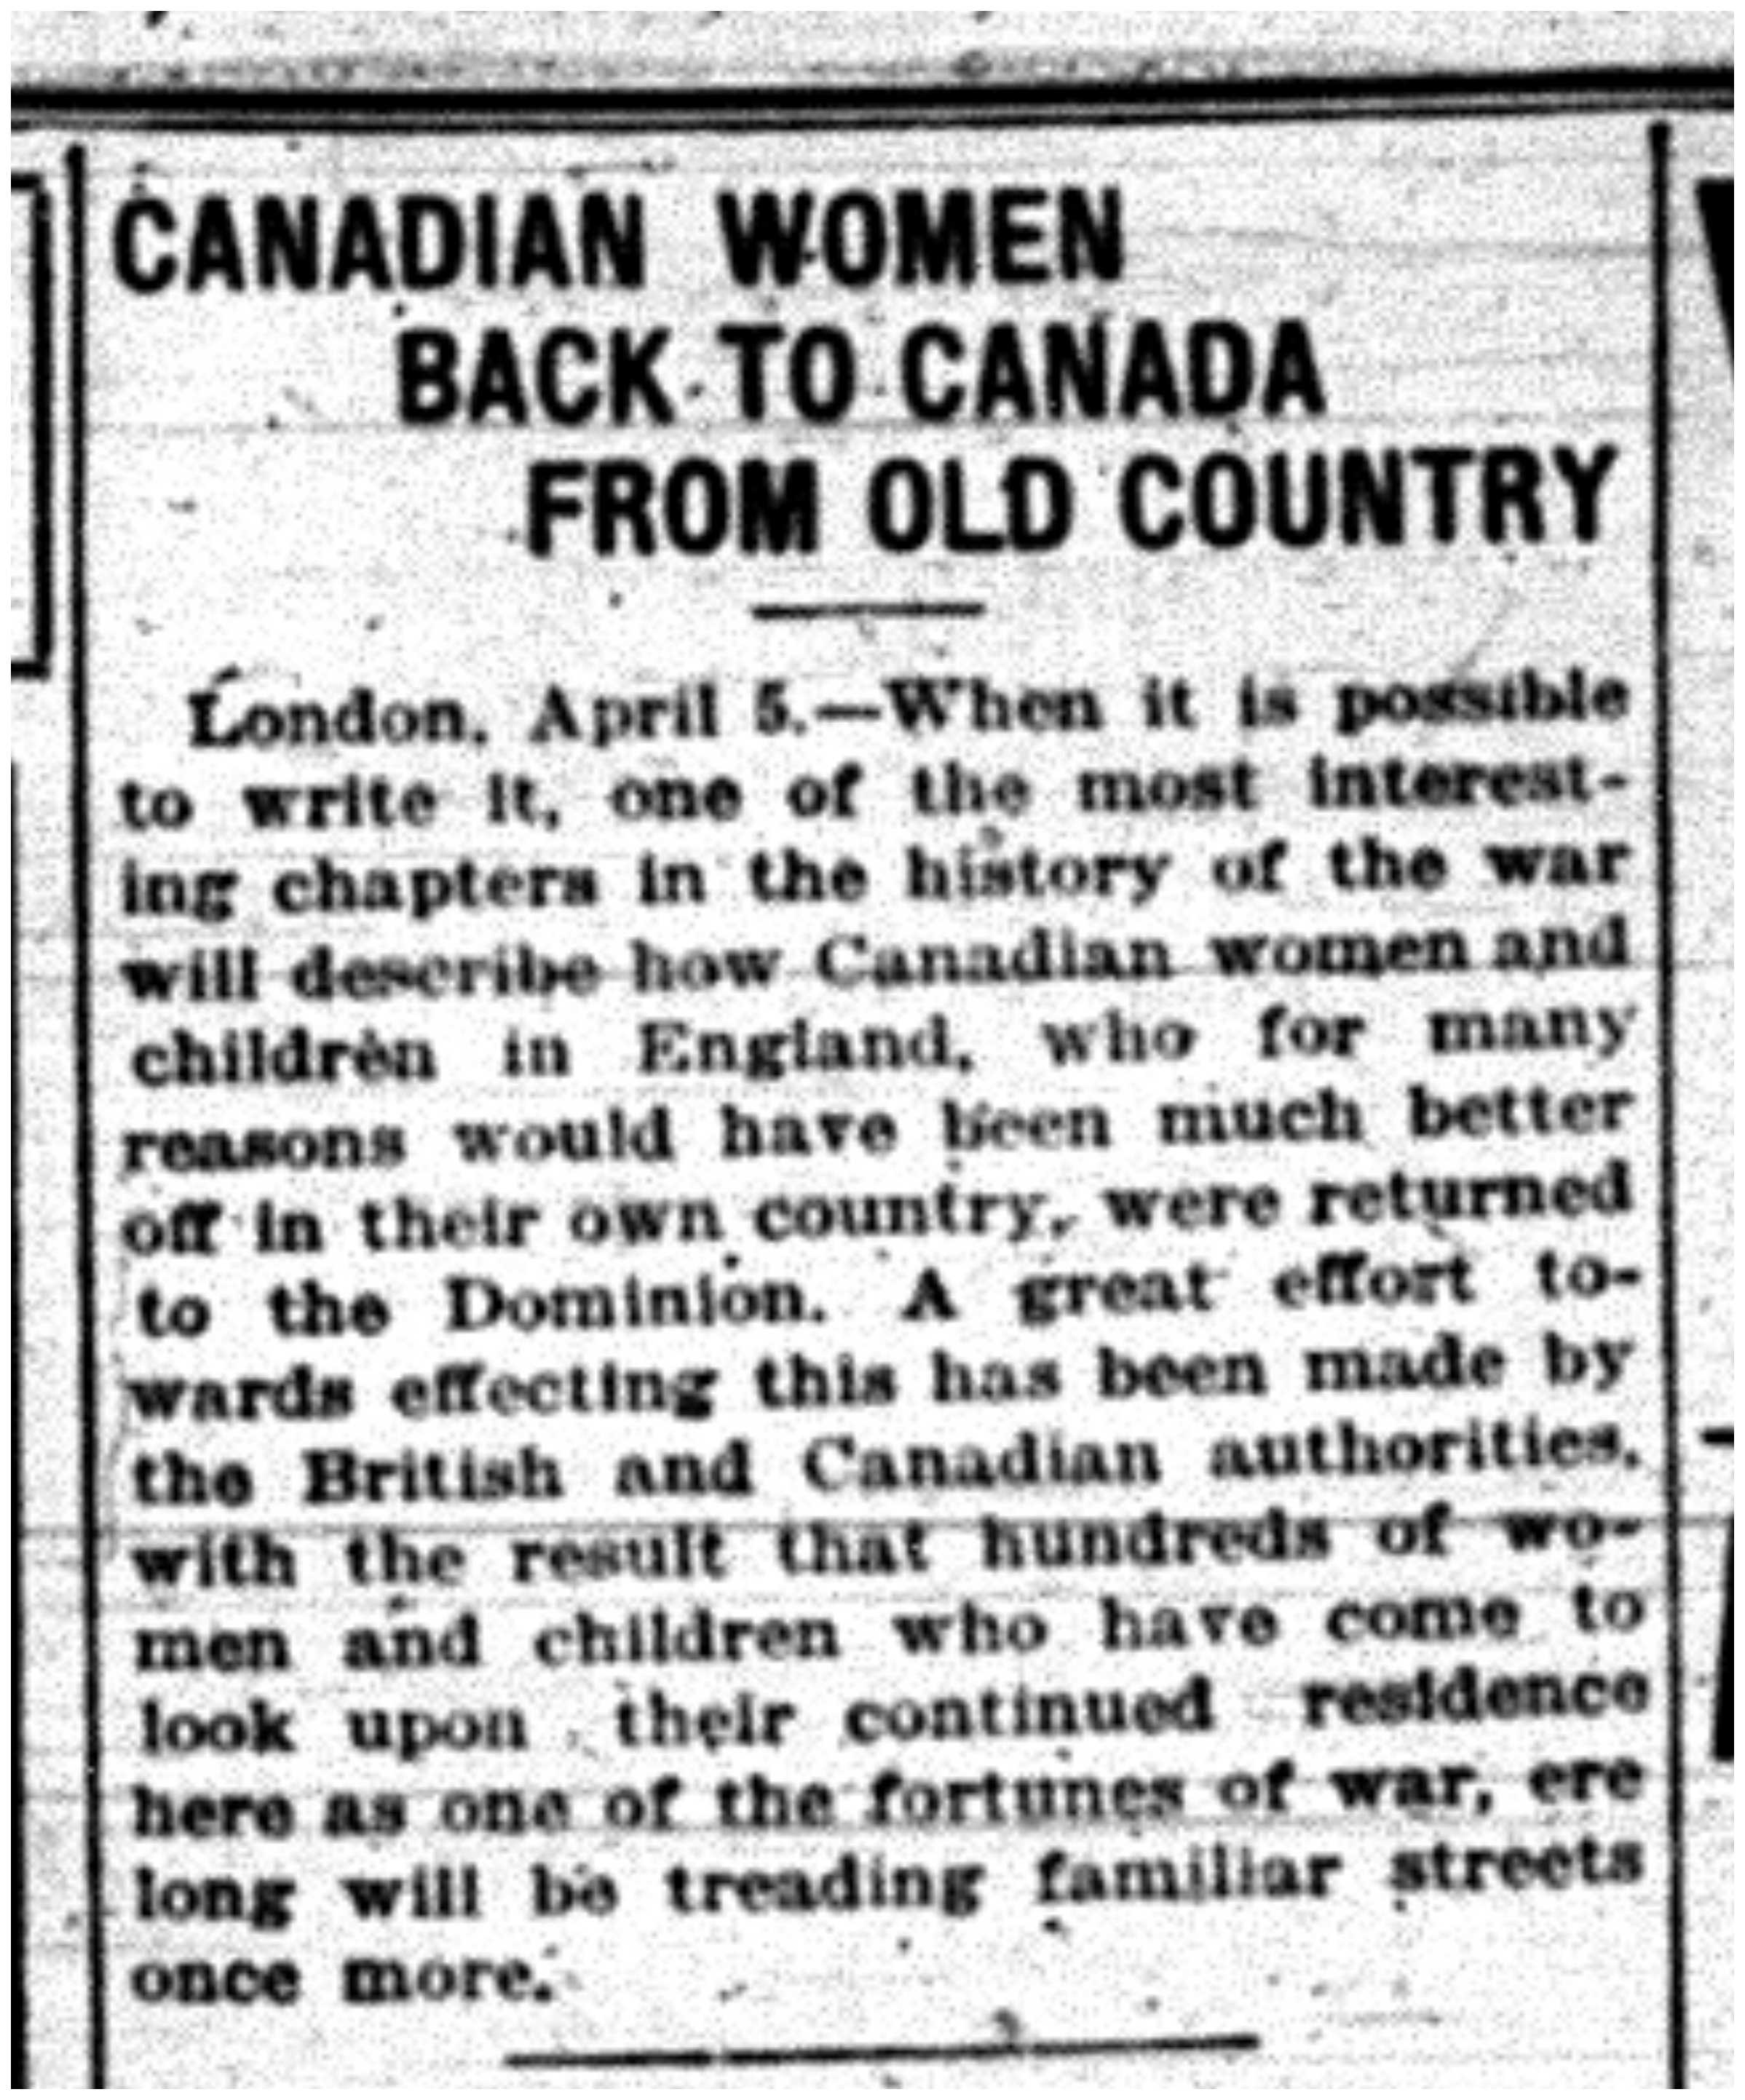 "Canadian Women Back to Canada from Old Country"